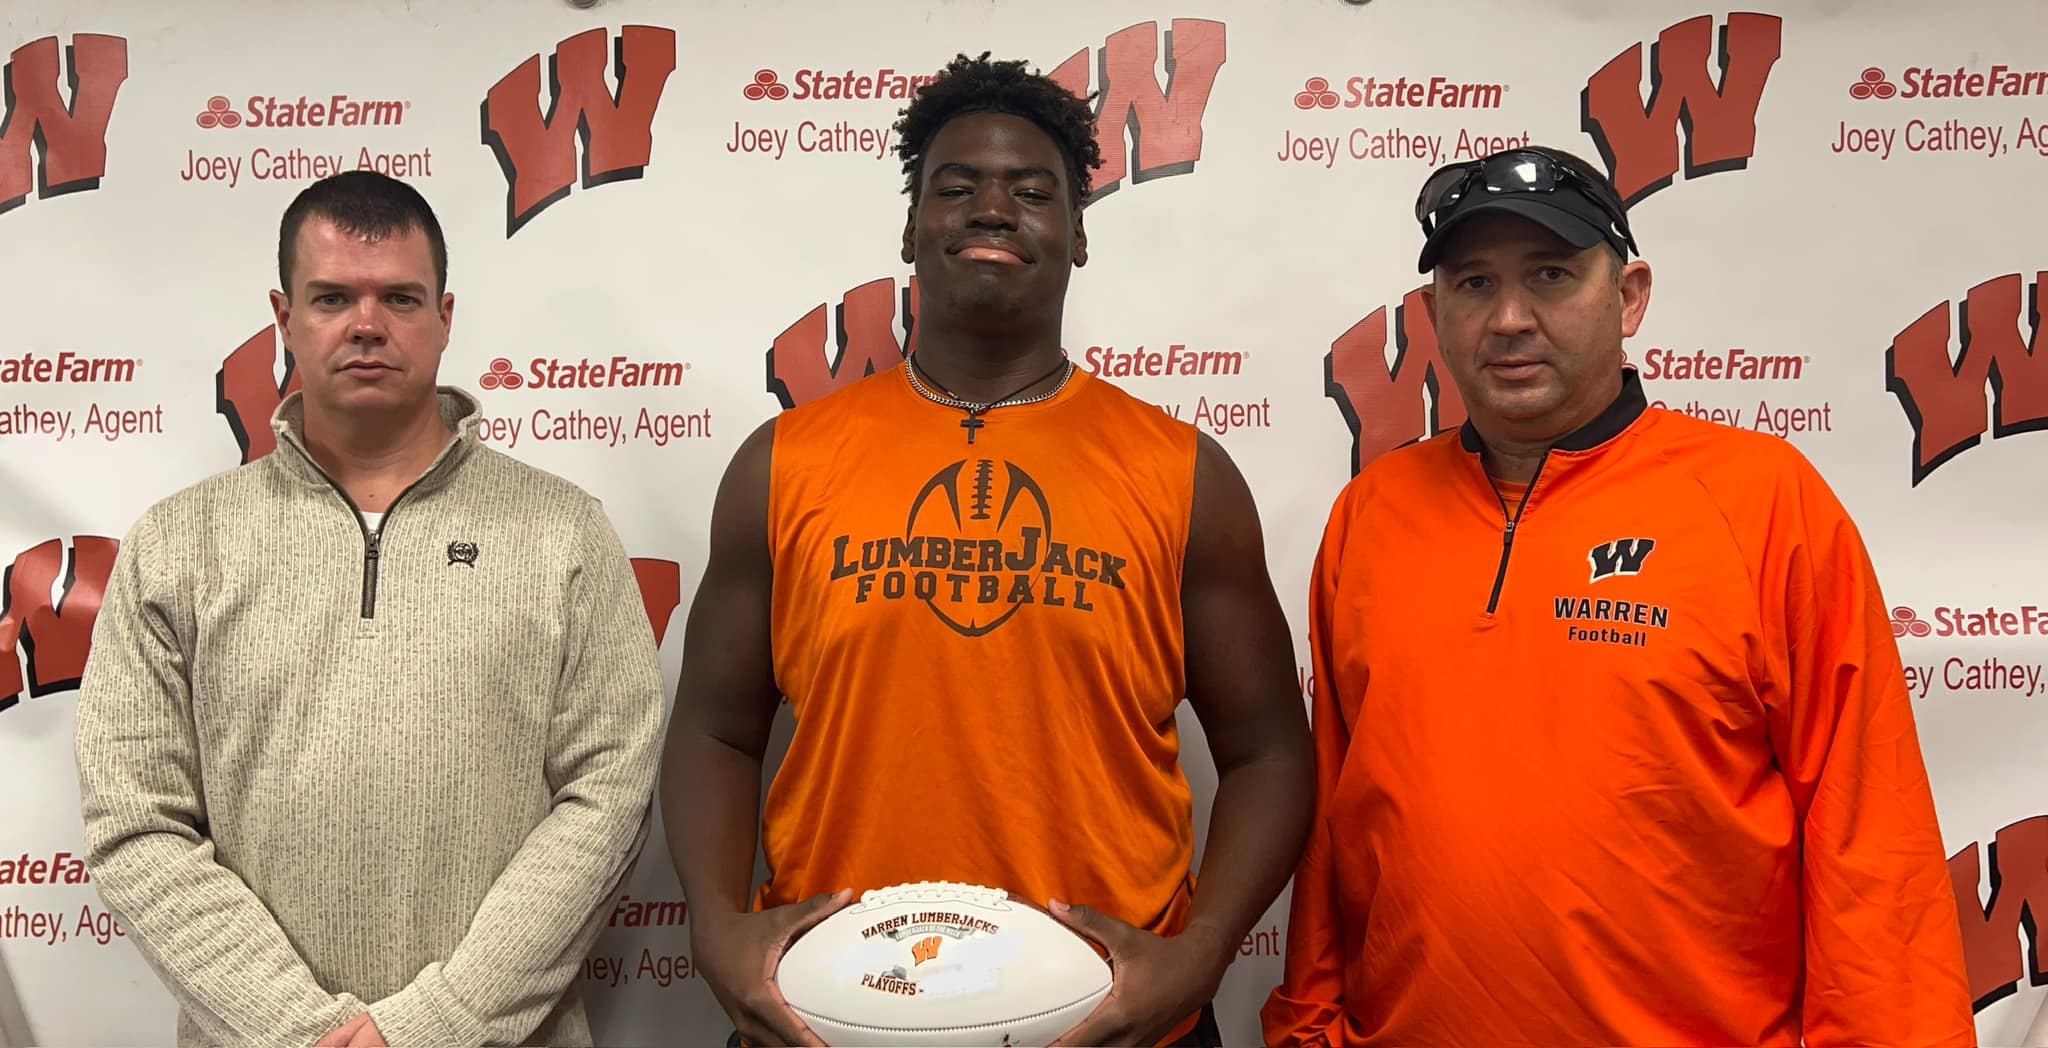 Terence Roberson named State Farm Lumberjack of the Week